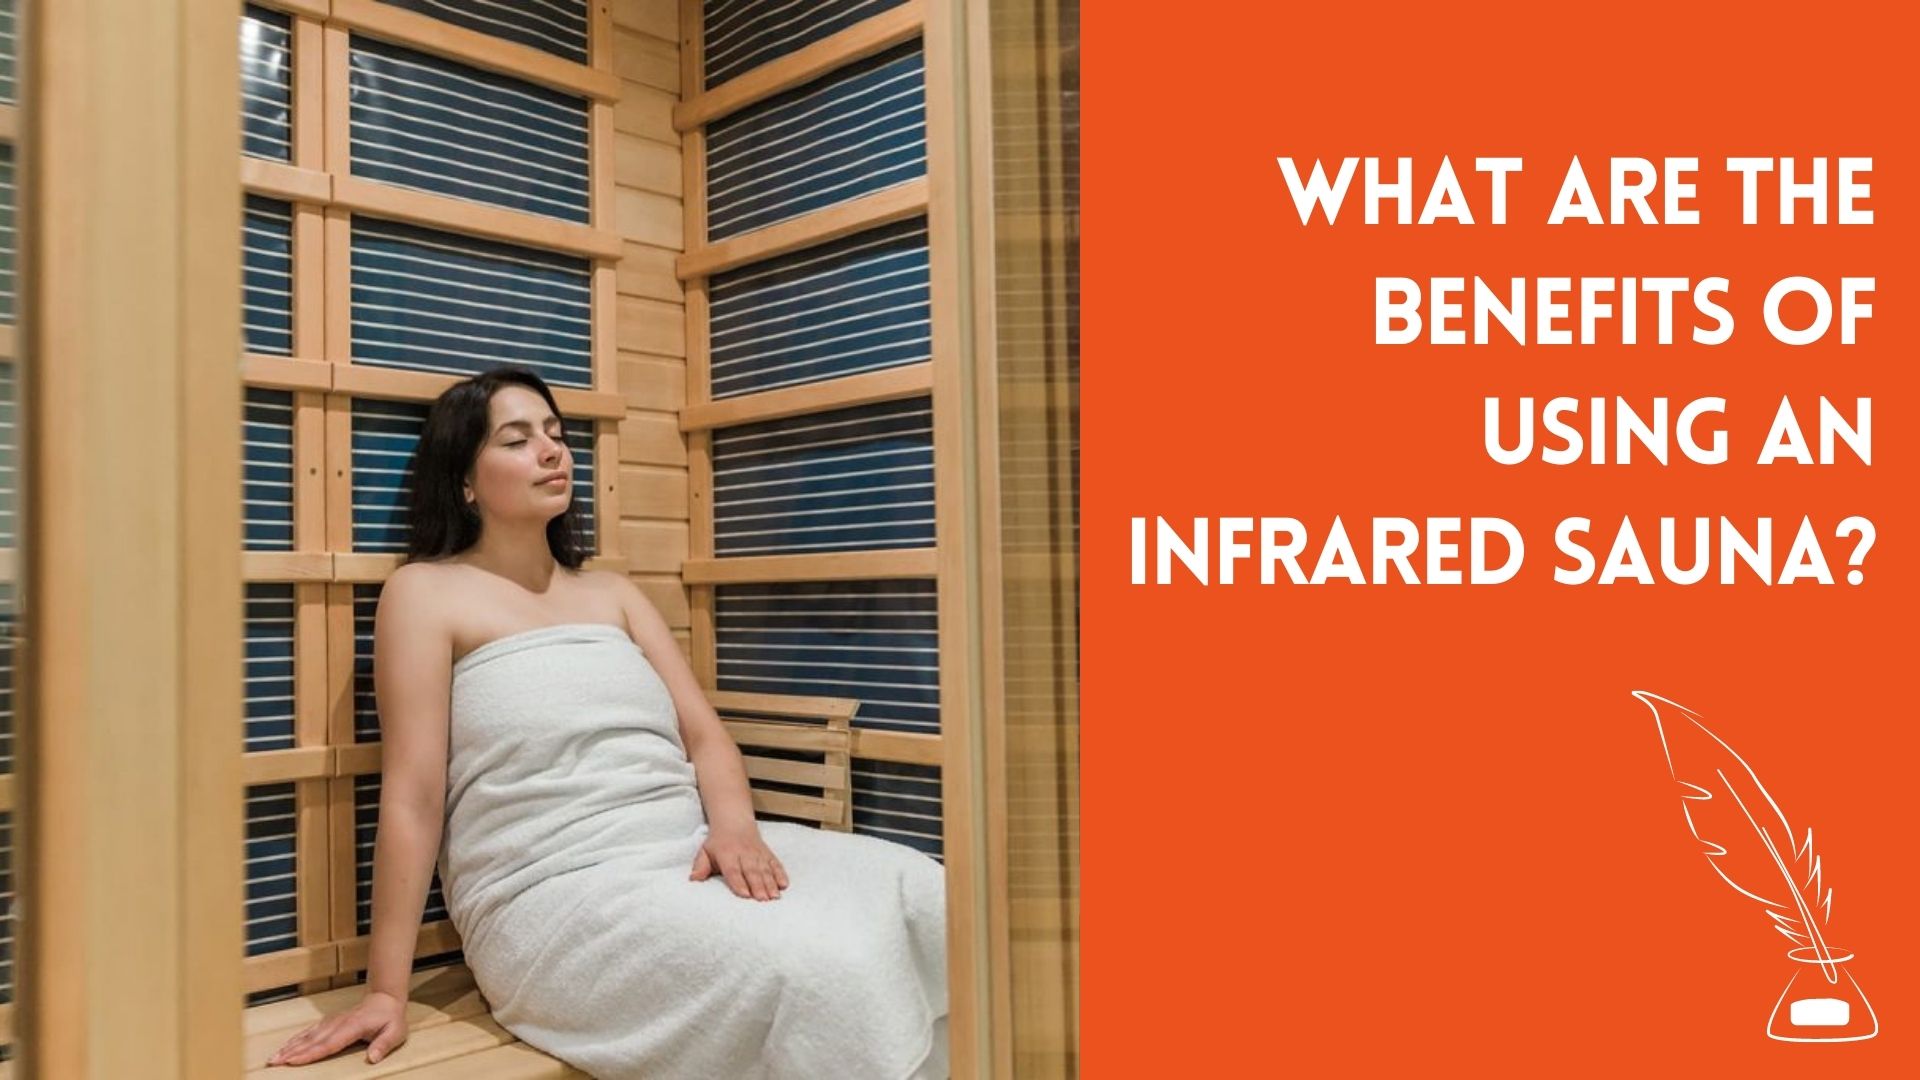 What Are The Benefits Of Using An Infrared Sauna?